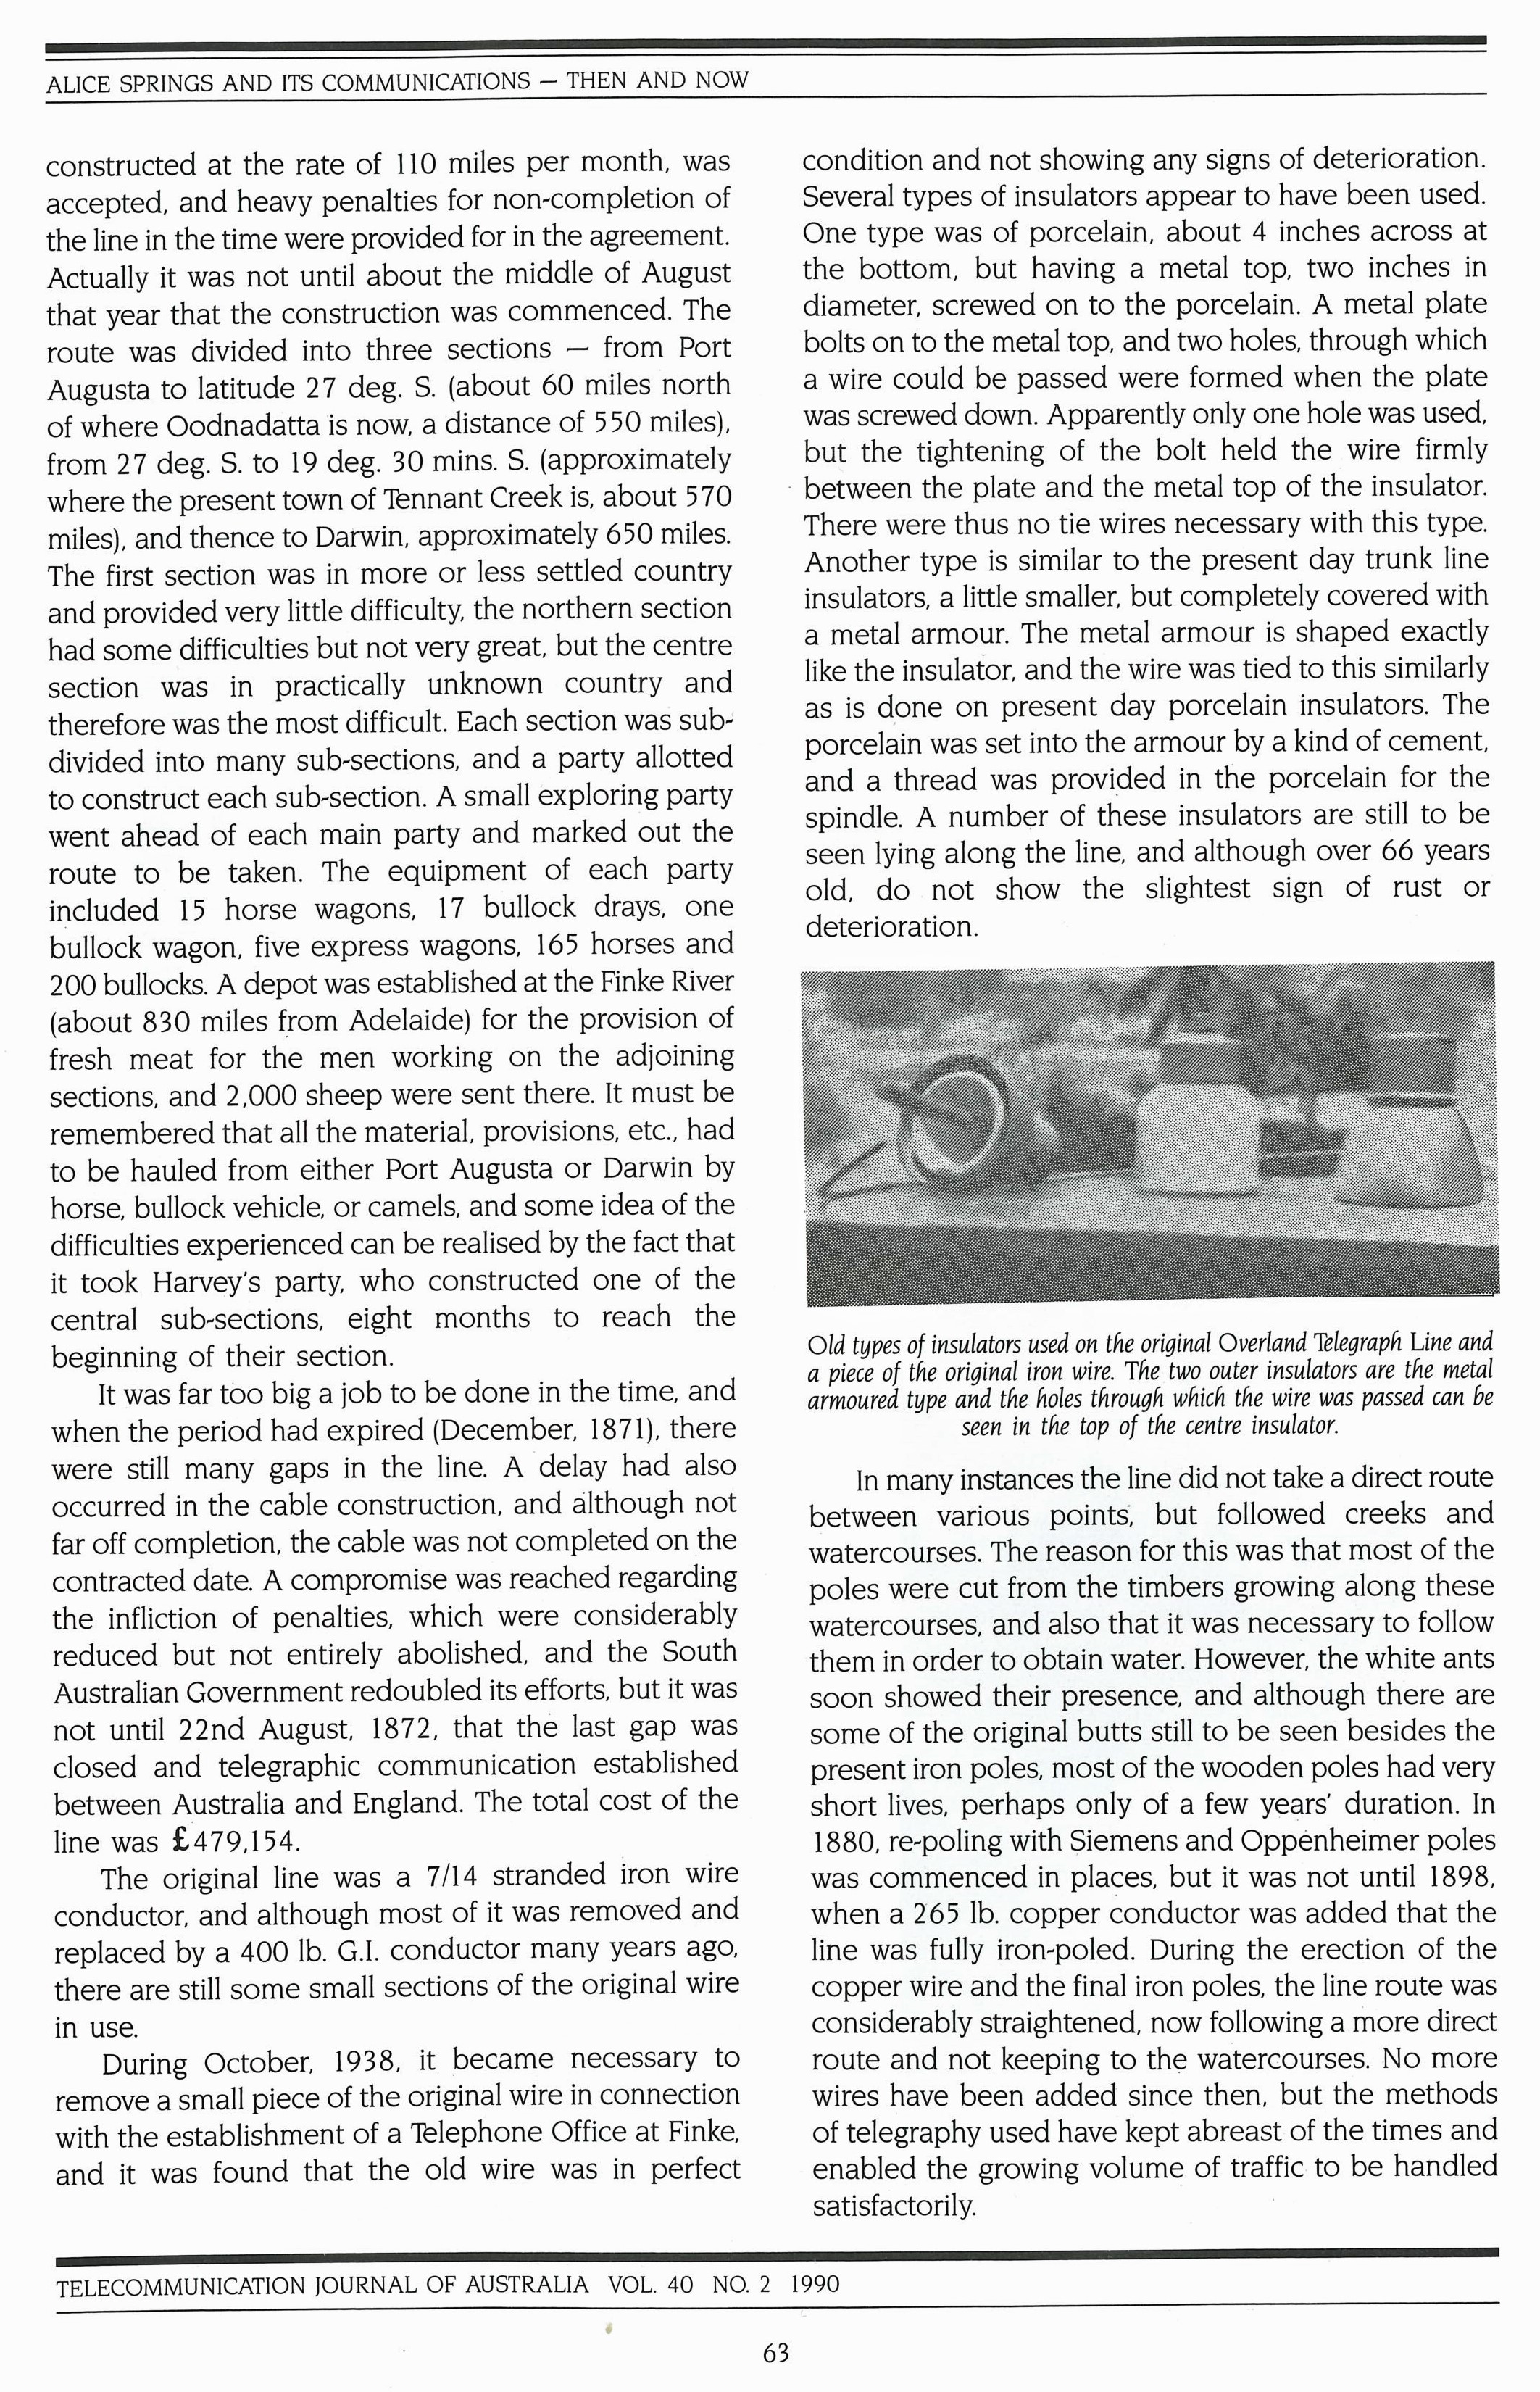 Page 2 of 1990 historical paper